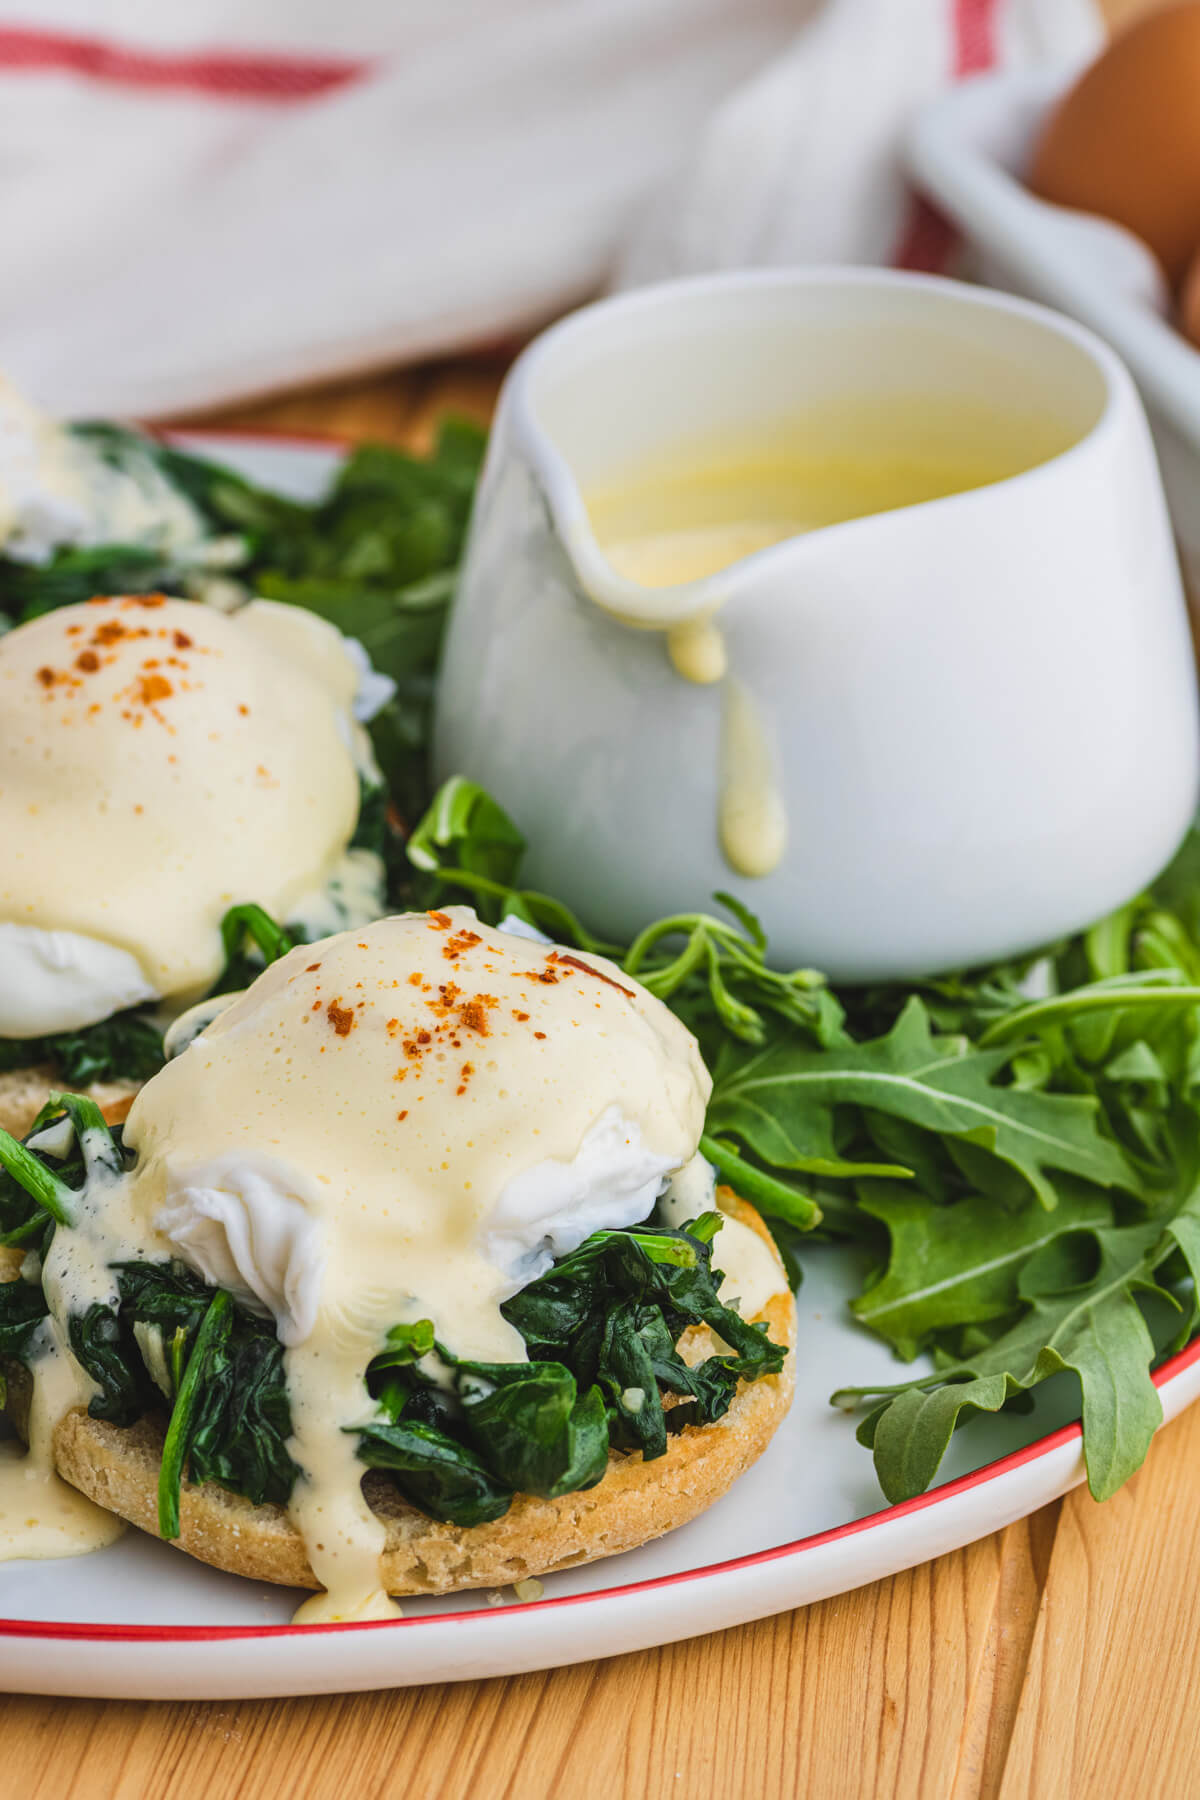 A red rimmed white plate holding two poached eggs covered in creamy yellow hollandaise sauce over a bed of spinach on toasted English muffins with a side of asparagus and baby arugula.